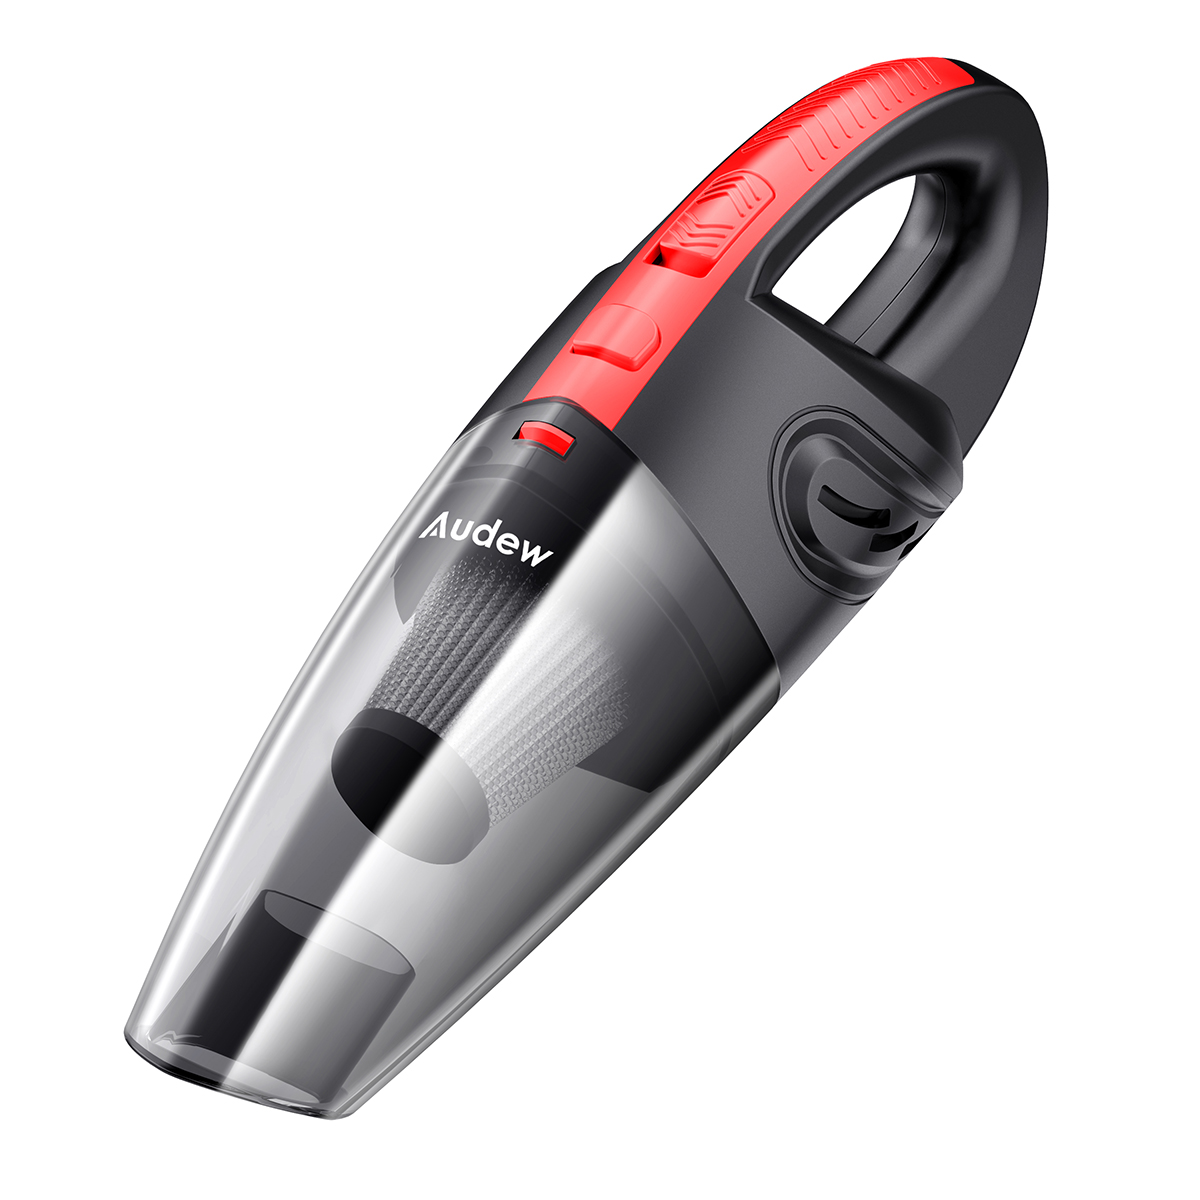 Portable Hoover Hand Held Vacuum Cleaner Cordless Rechargeable Home Car Pet Hair 